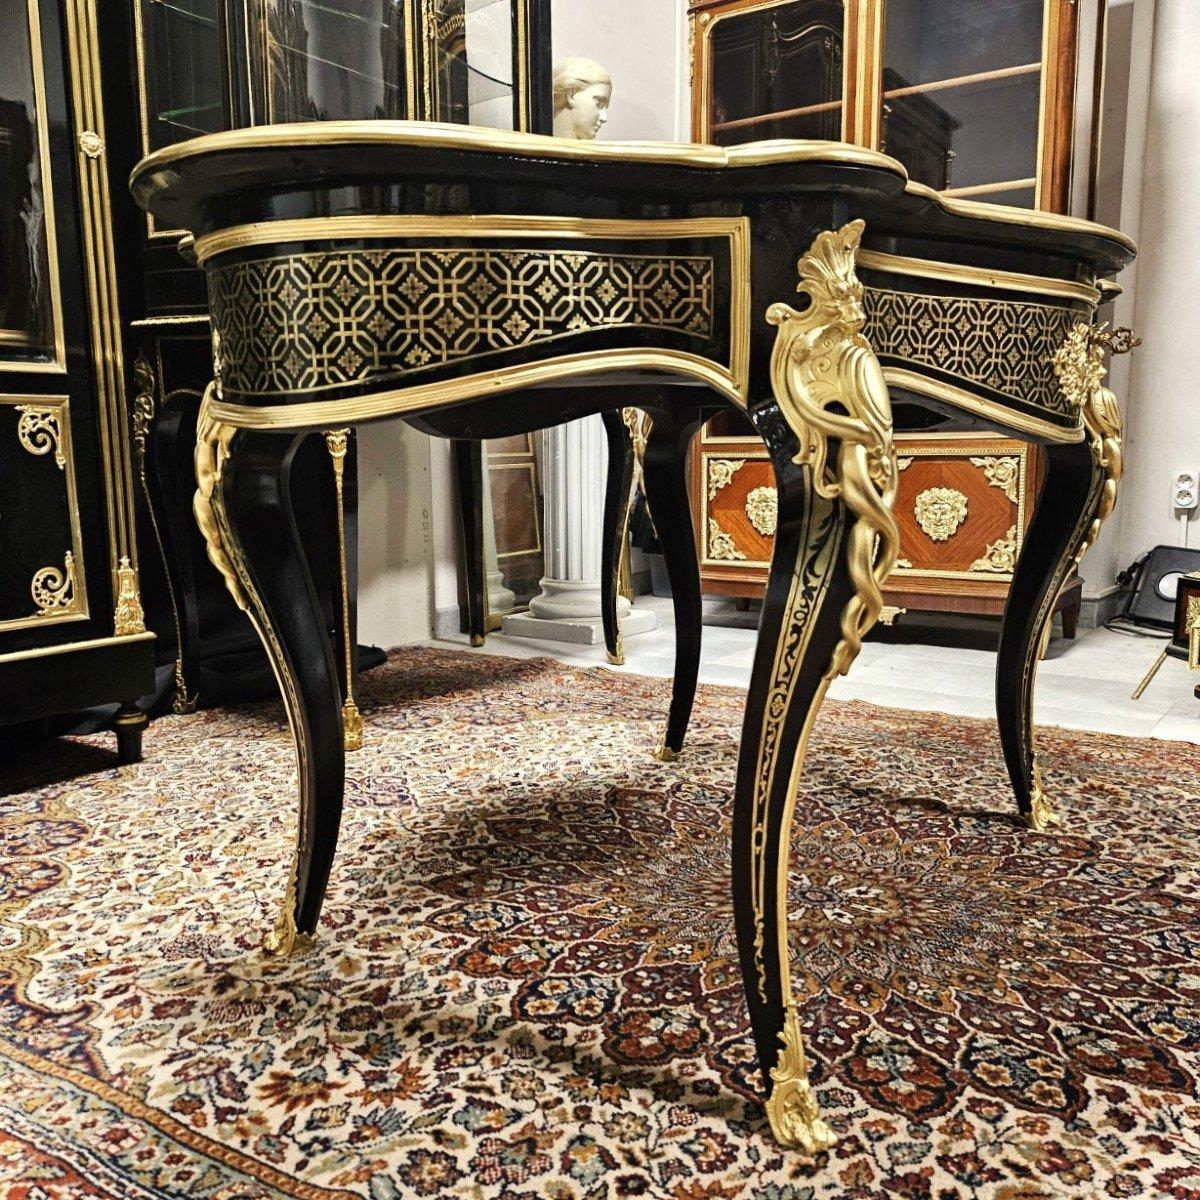 Diehl Black French Table Napoleon III Boulle Brass Gilt Bronze 19th Century For Sale 5